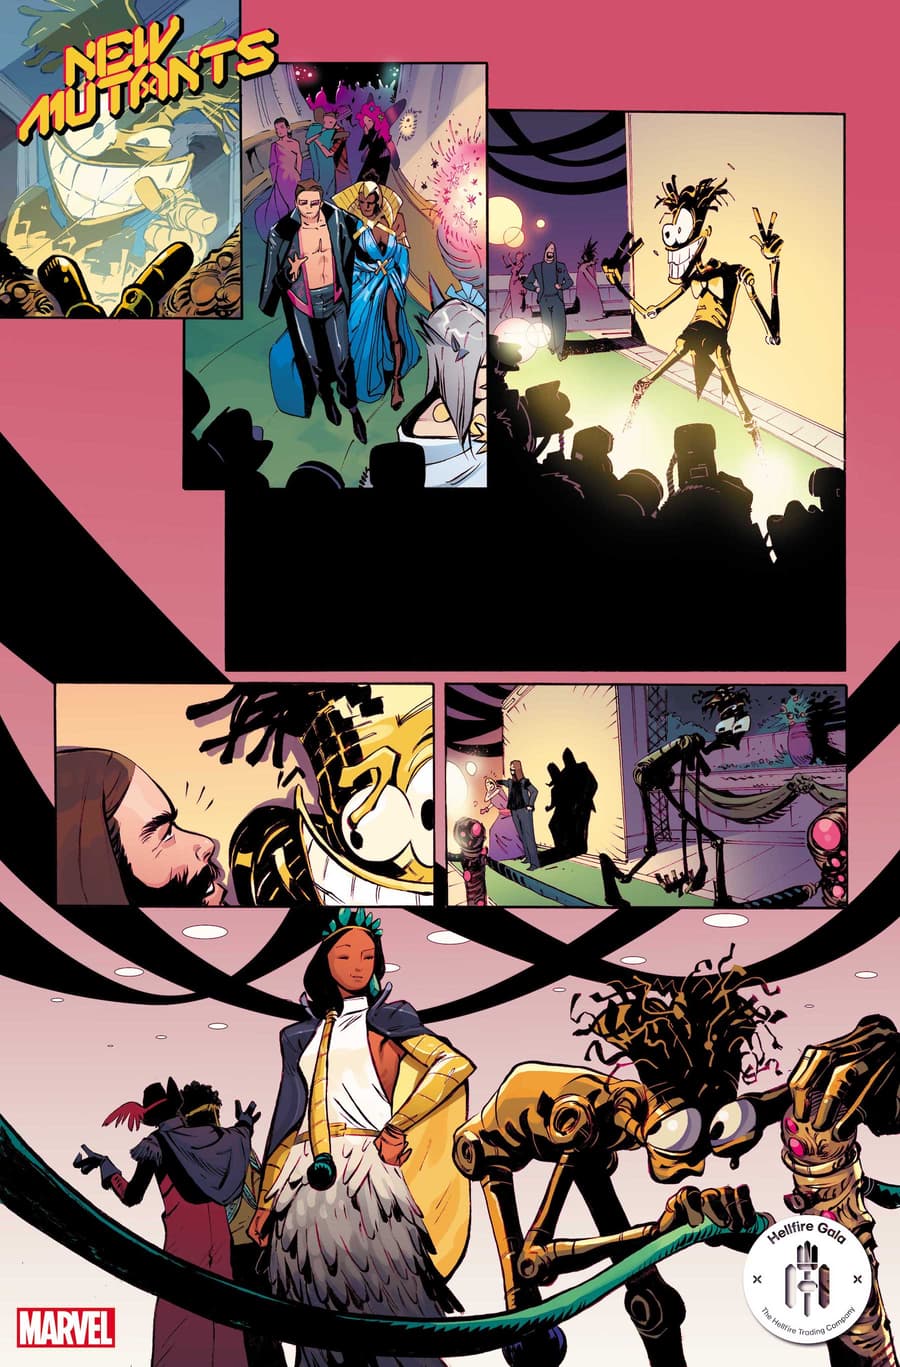 NEW MUTANTS #19 preview art by Alex Lins with colors by Matt Milla